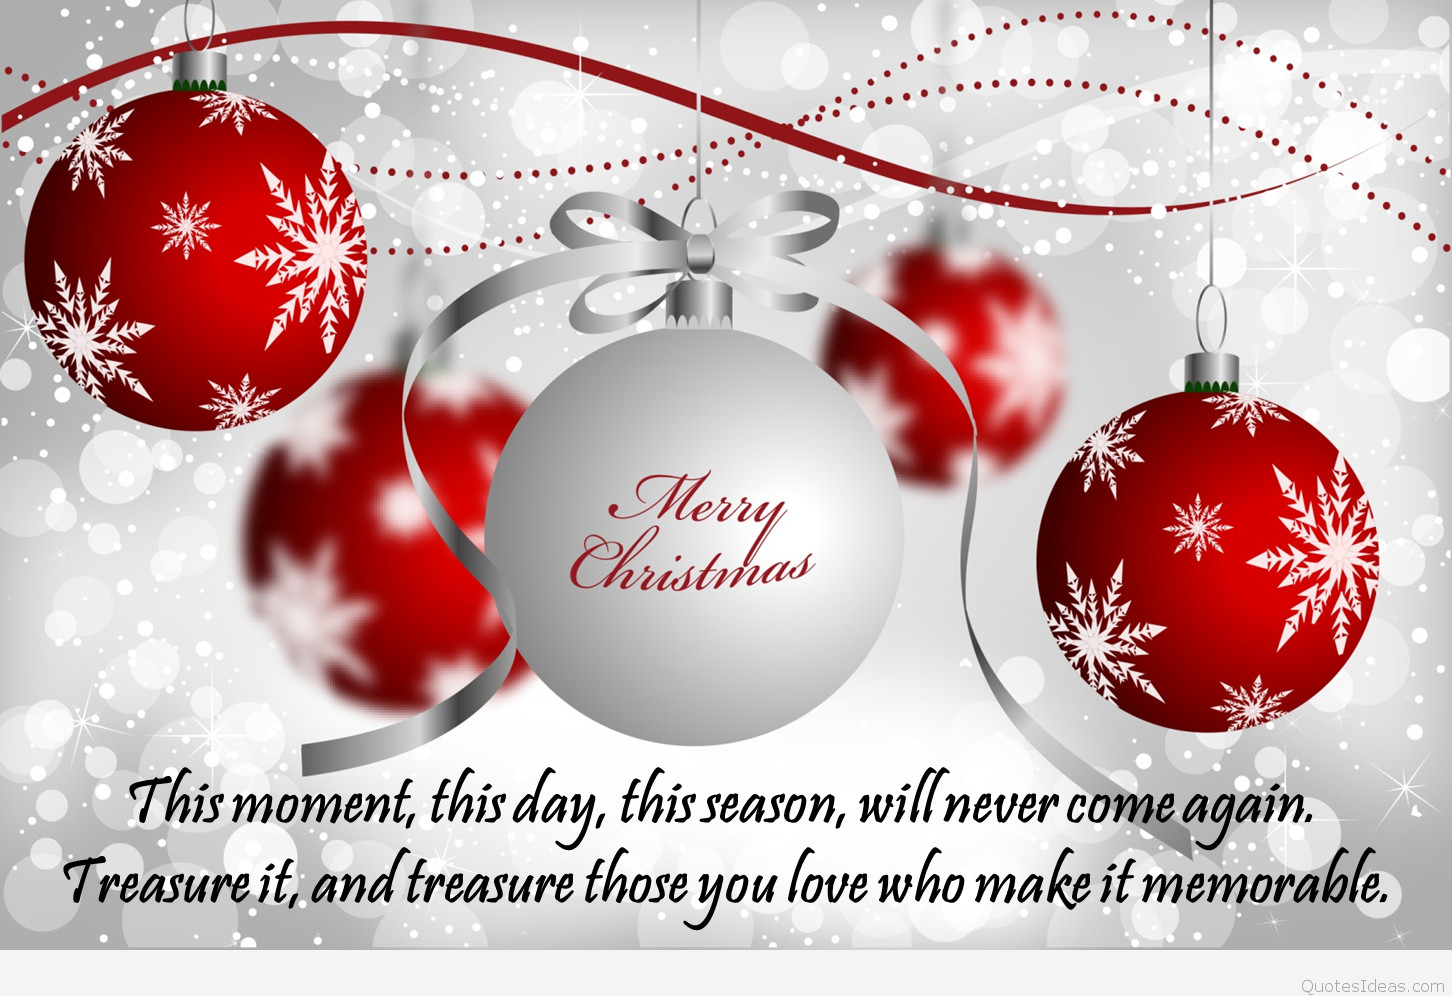 Merry Christmas Wishes Quotes
 Merry Christmas quotes